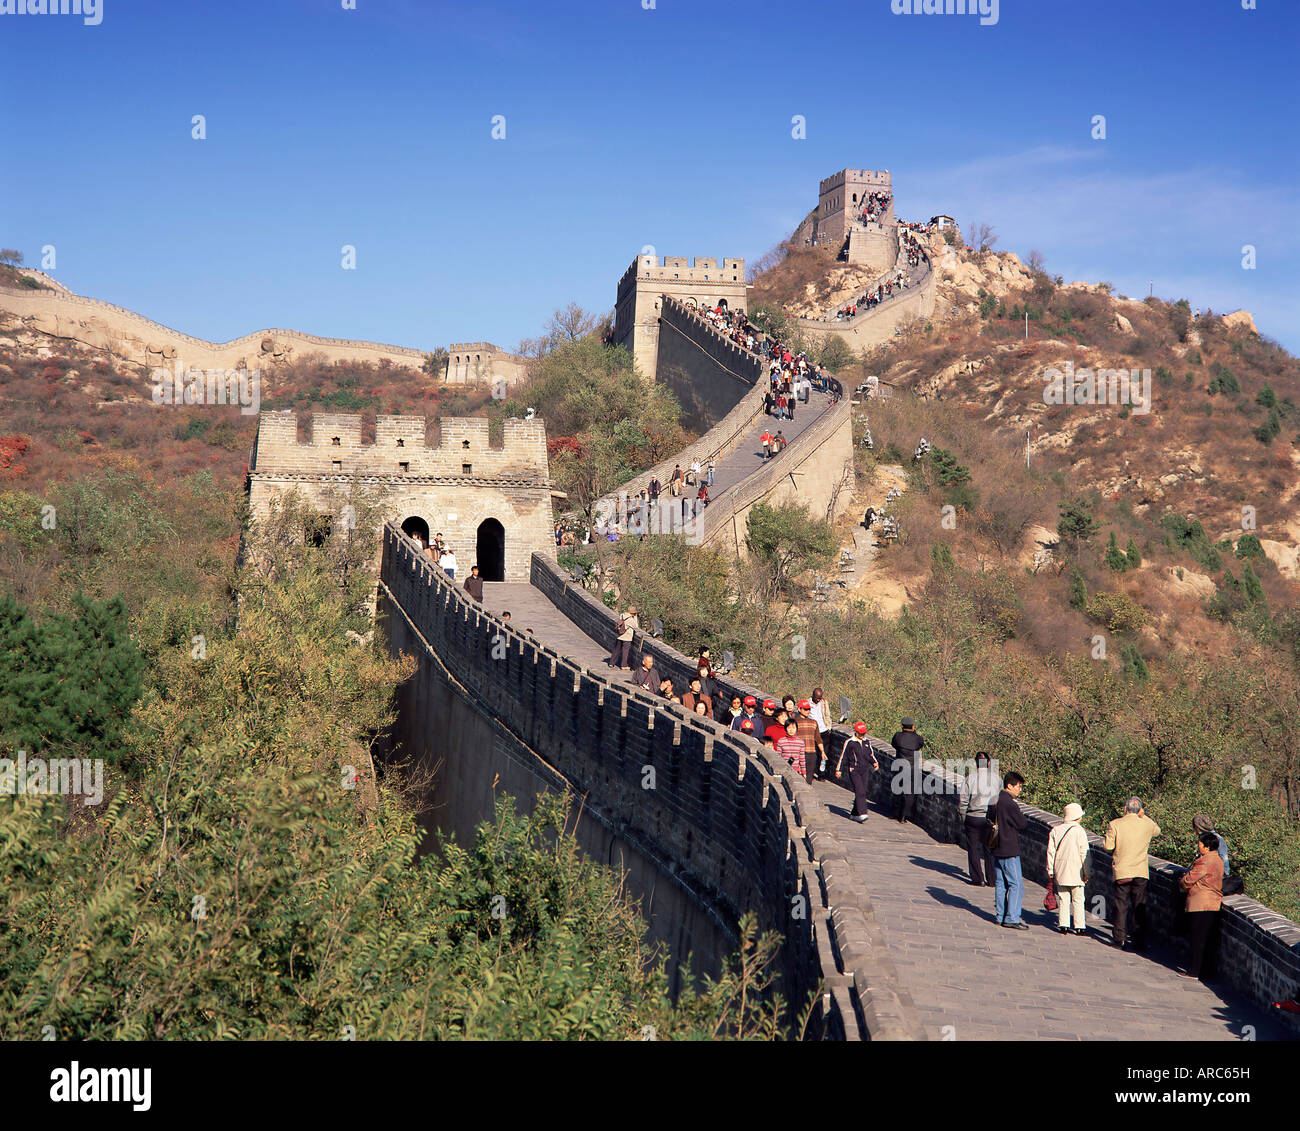 People on the Badaling section, the Great Wall of China, UNESCO World Heritage Site, near Beijing, China, Asia Stock Photo